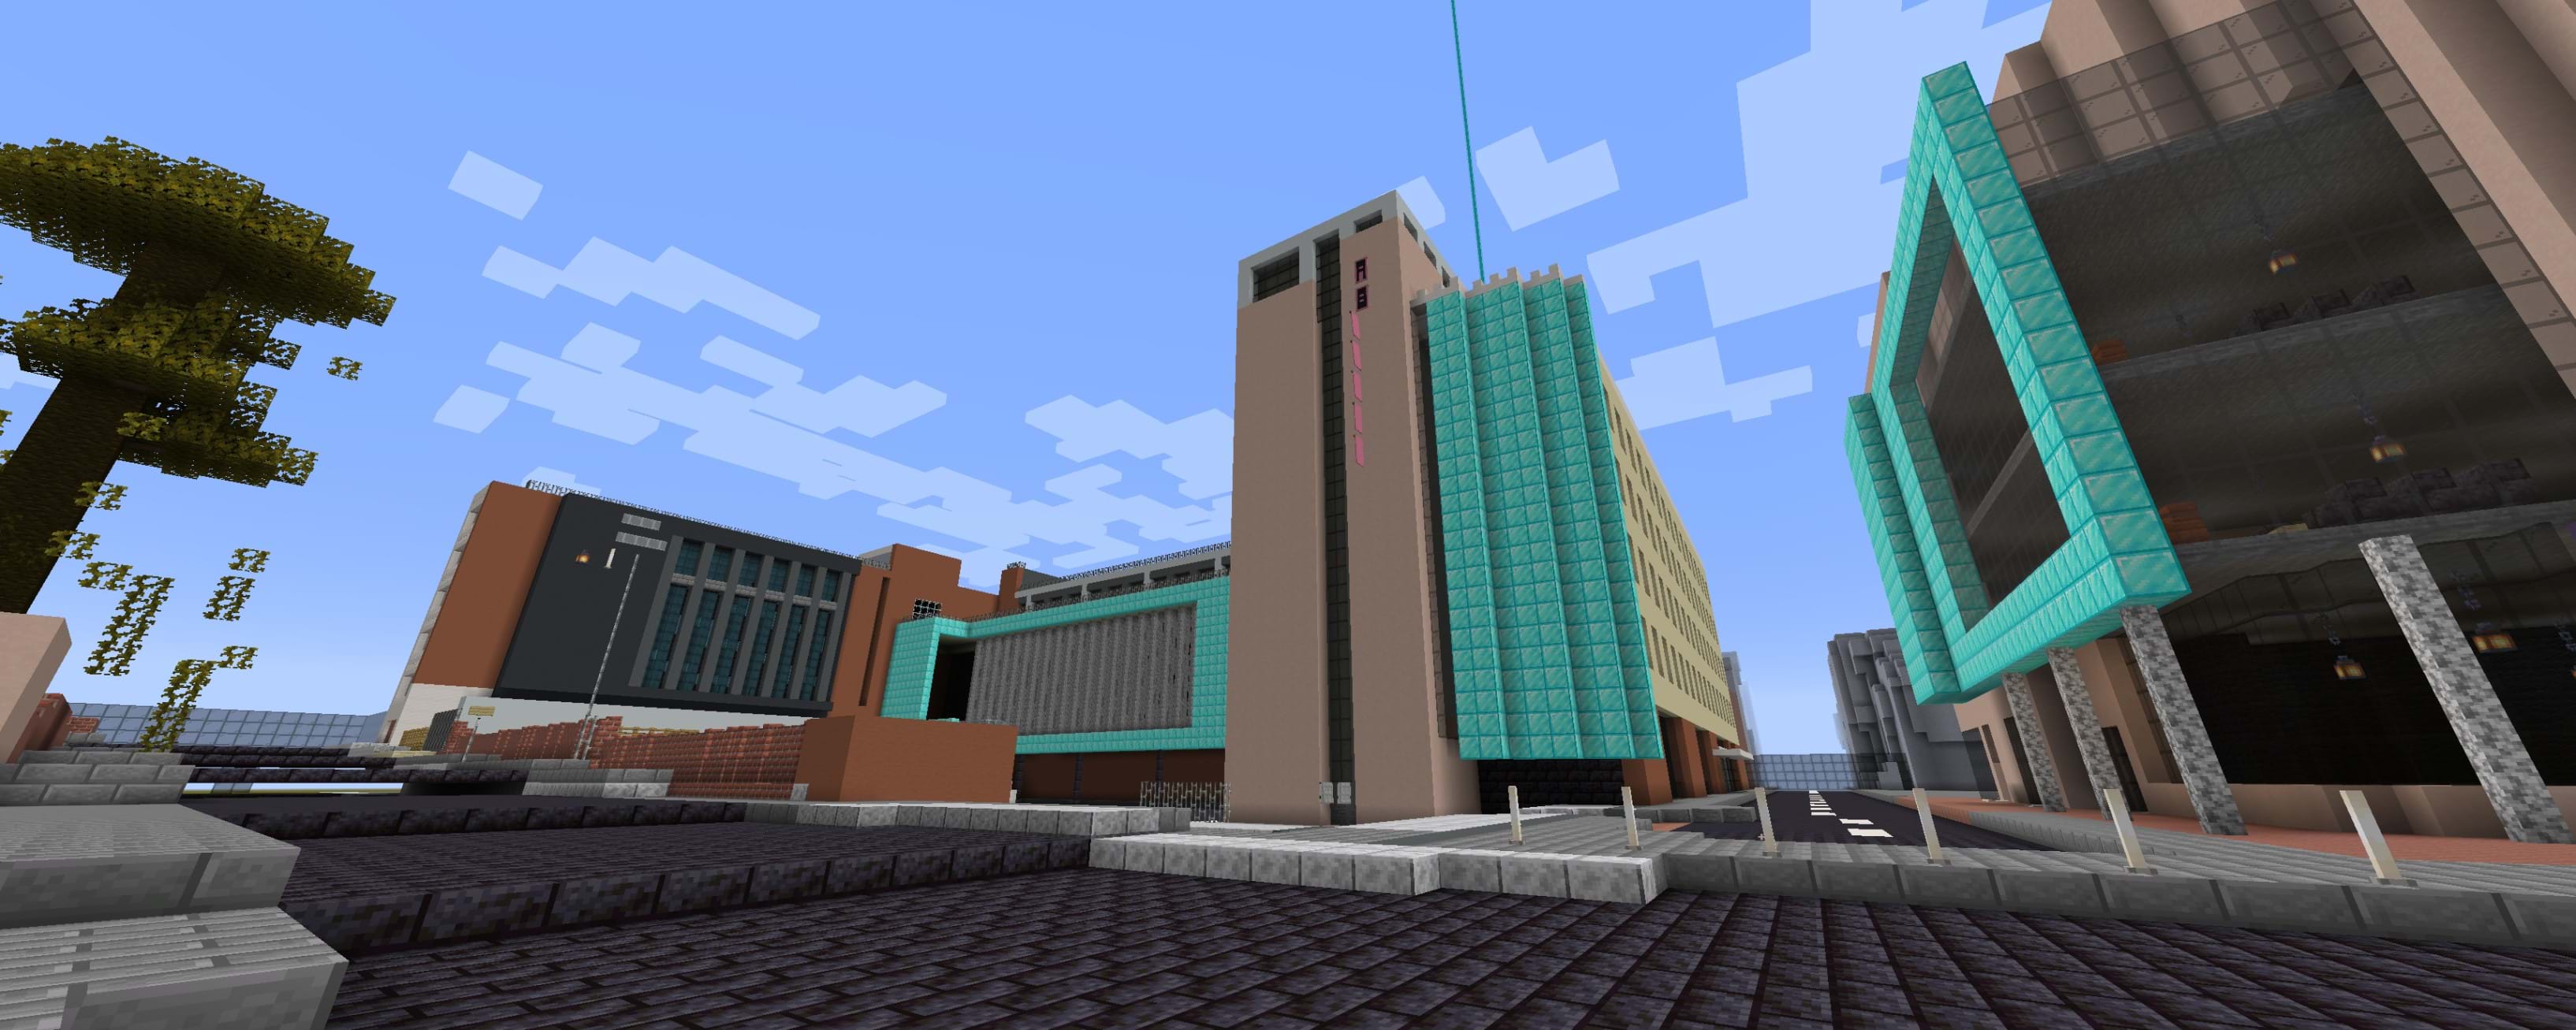 Abertay's Kydd Building recreated in Minecraft